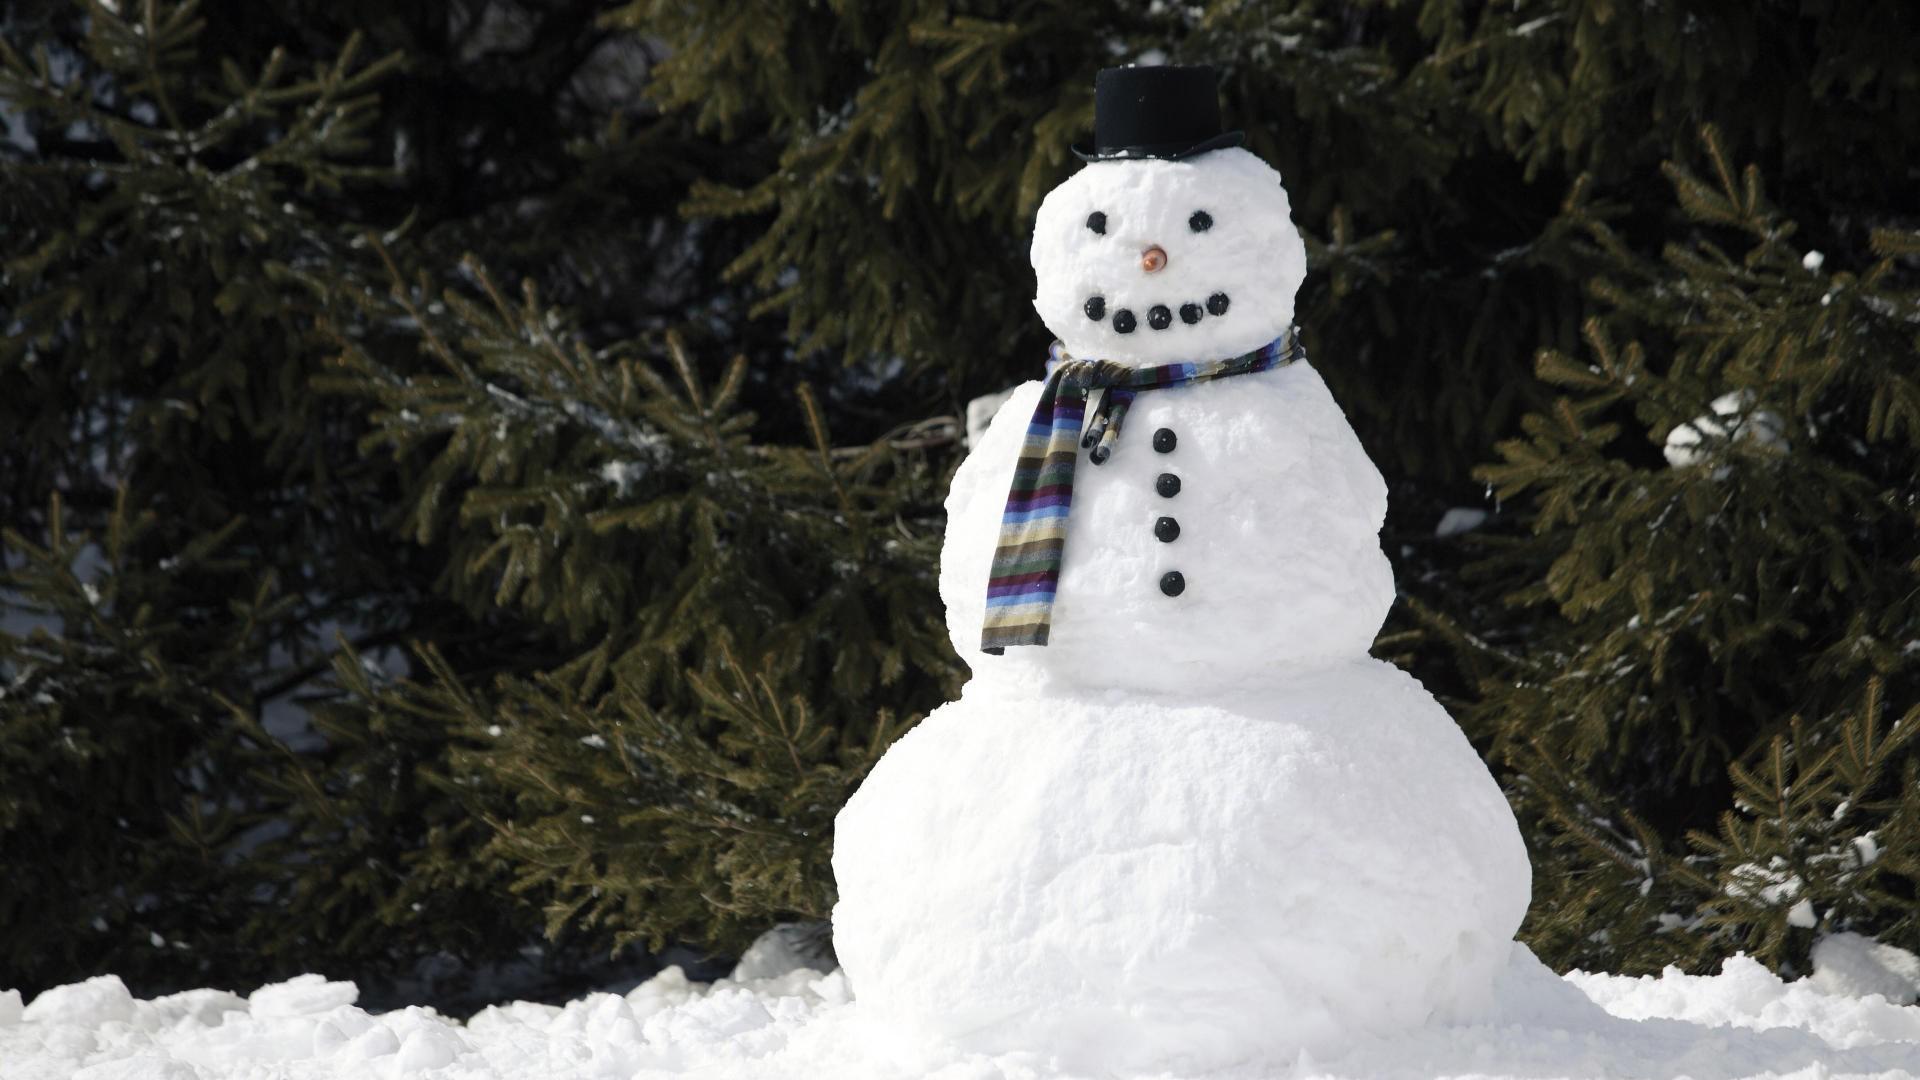 Snowman with a scarf wallpaper and image